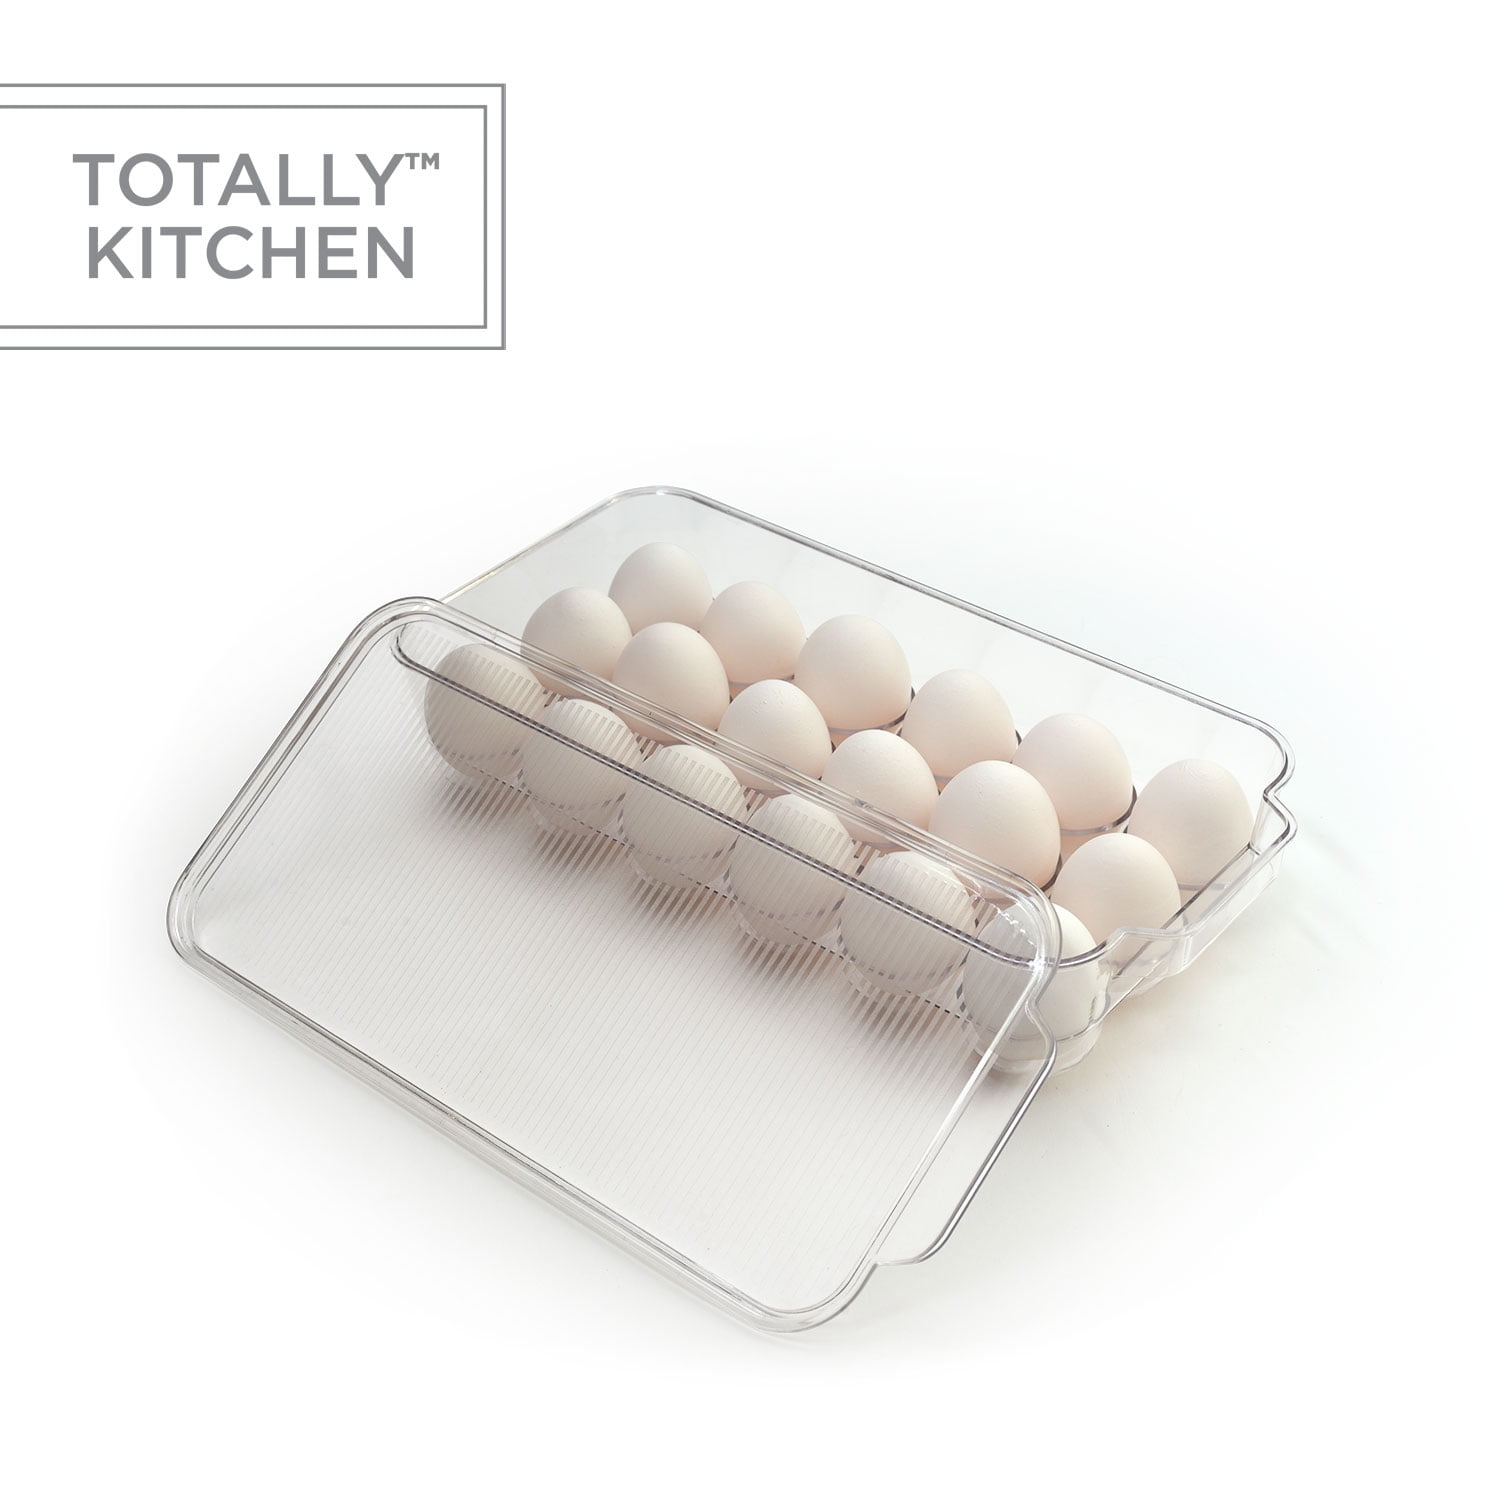 Utopia Home Egg Container With Lid & Handle for Refrigerator, Pack of 2 -  Clear Egg Holder for Kitchen Storage